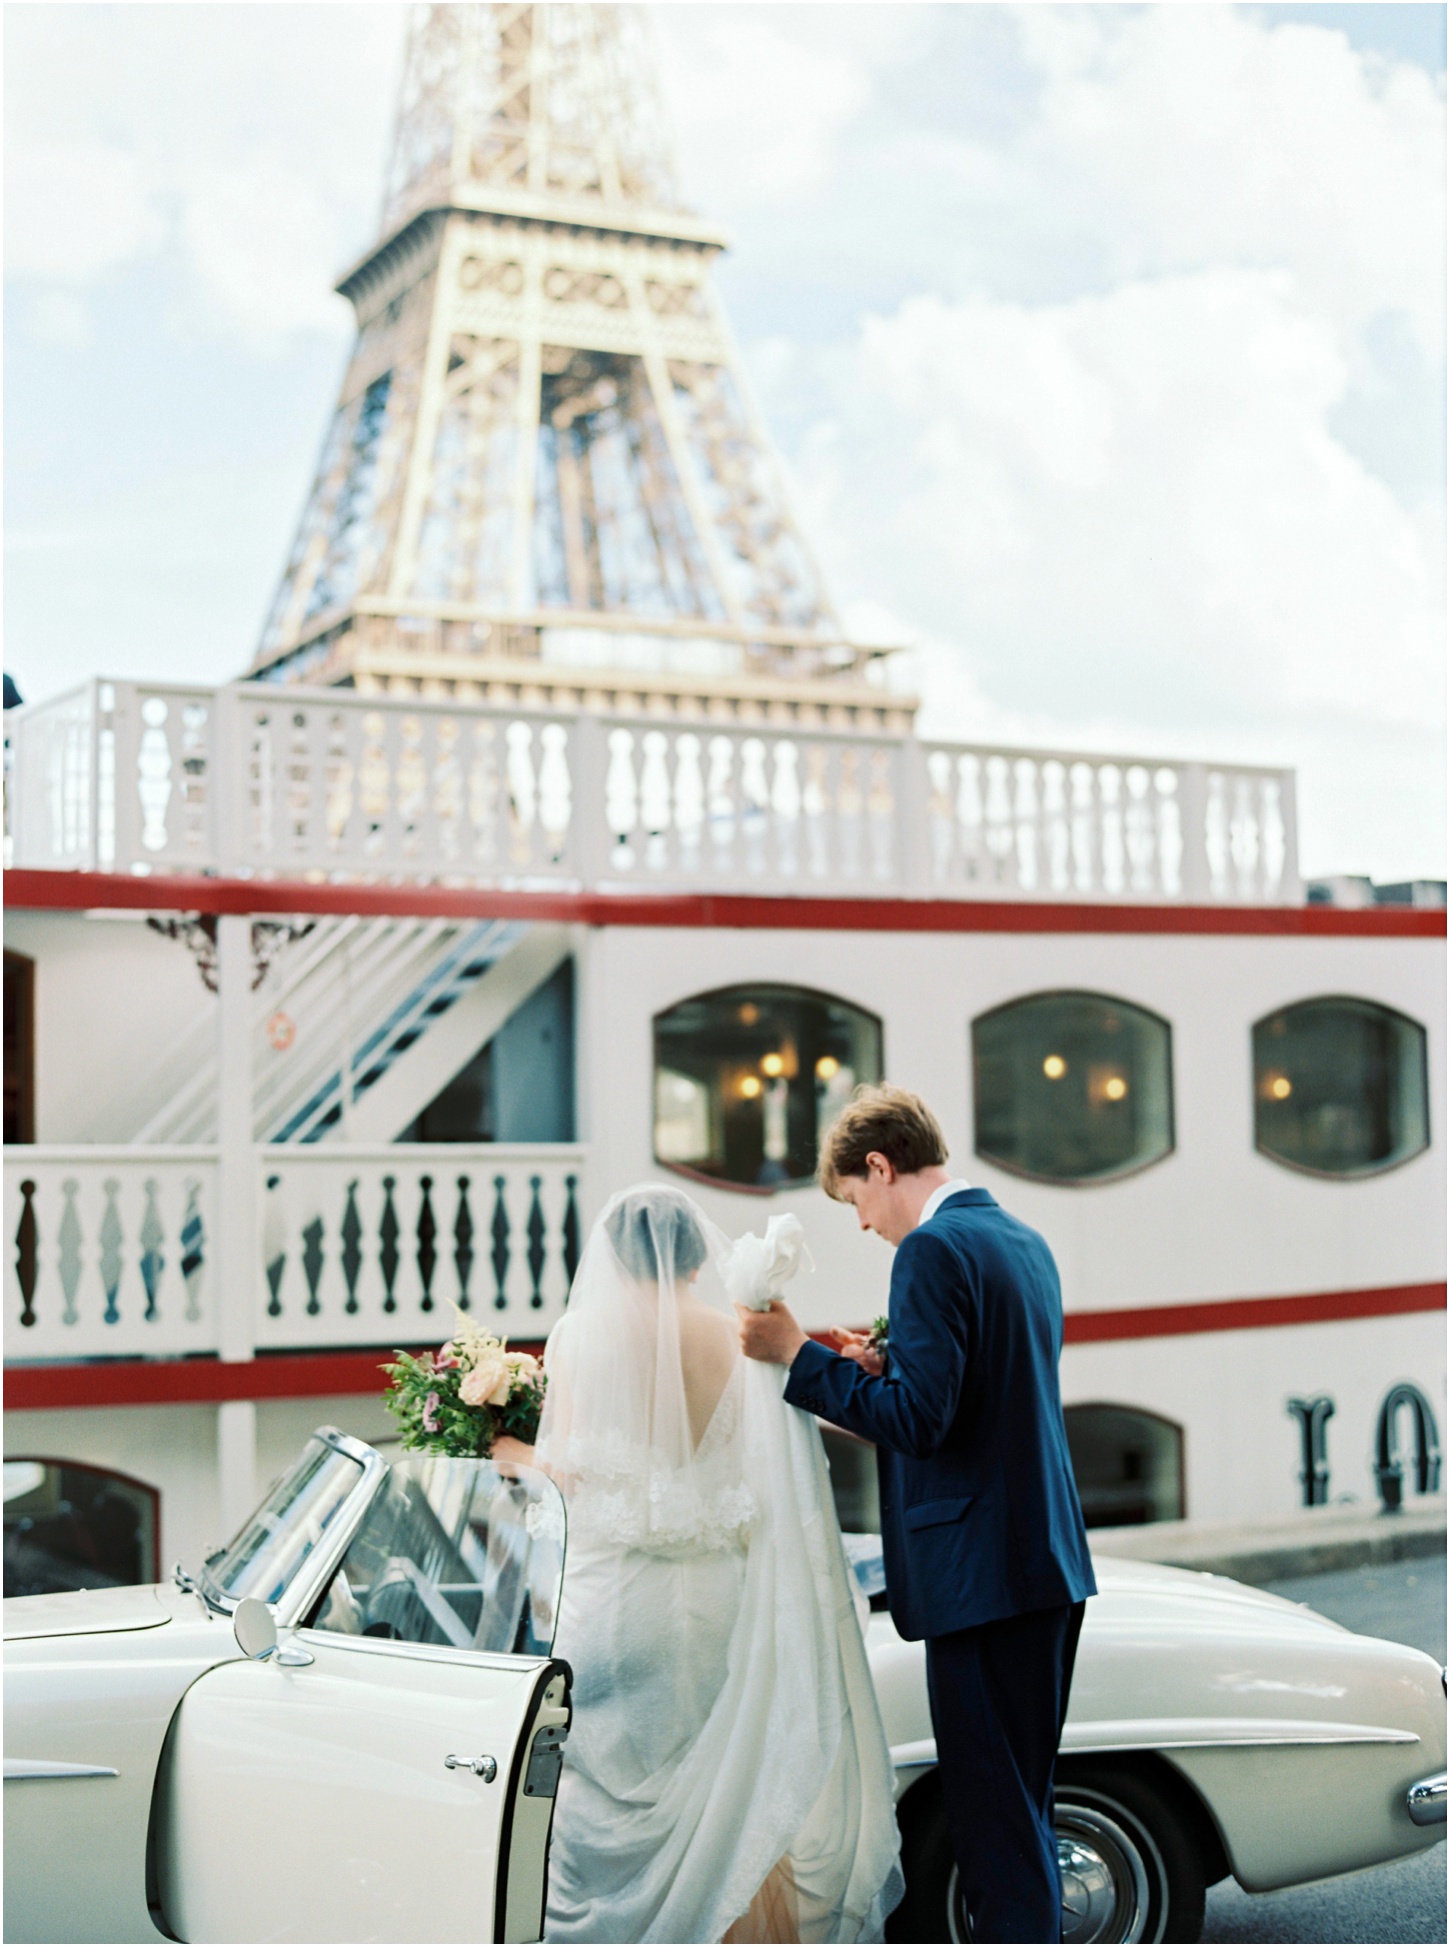 6 Tips for Finding Your Destination Wedding Photographer